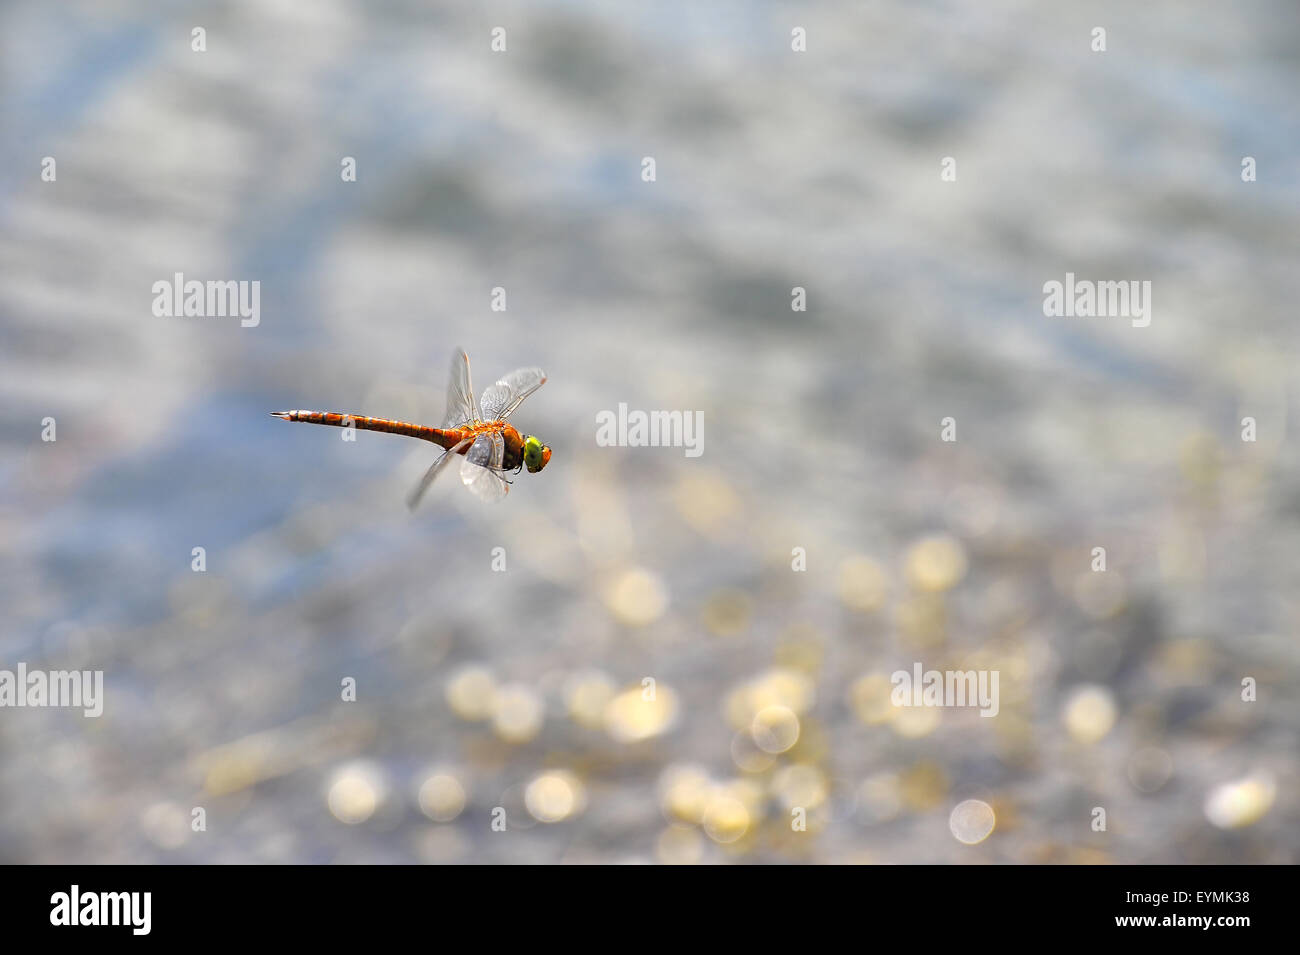 Dragonfly close up flying over the water, a kind of Simpetrum flaveolum.  Focus on head. Stock Photo